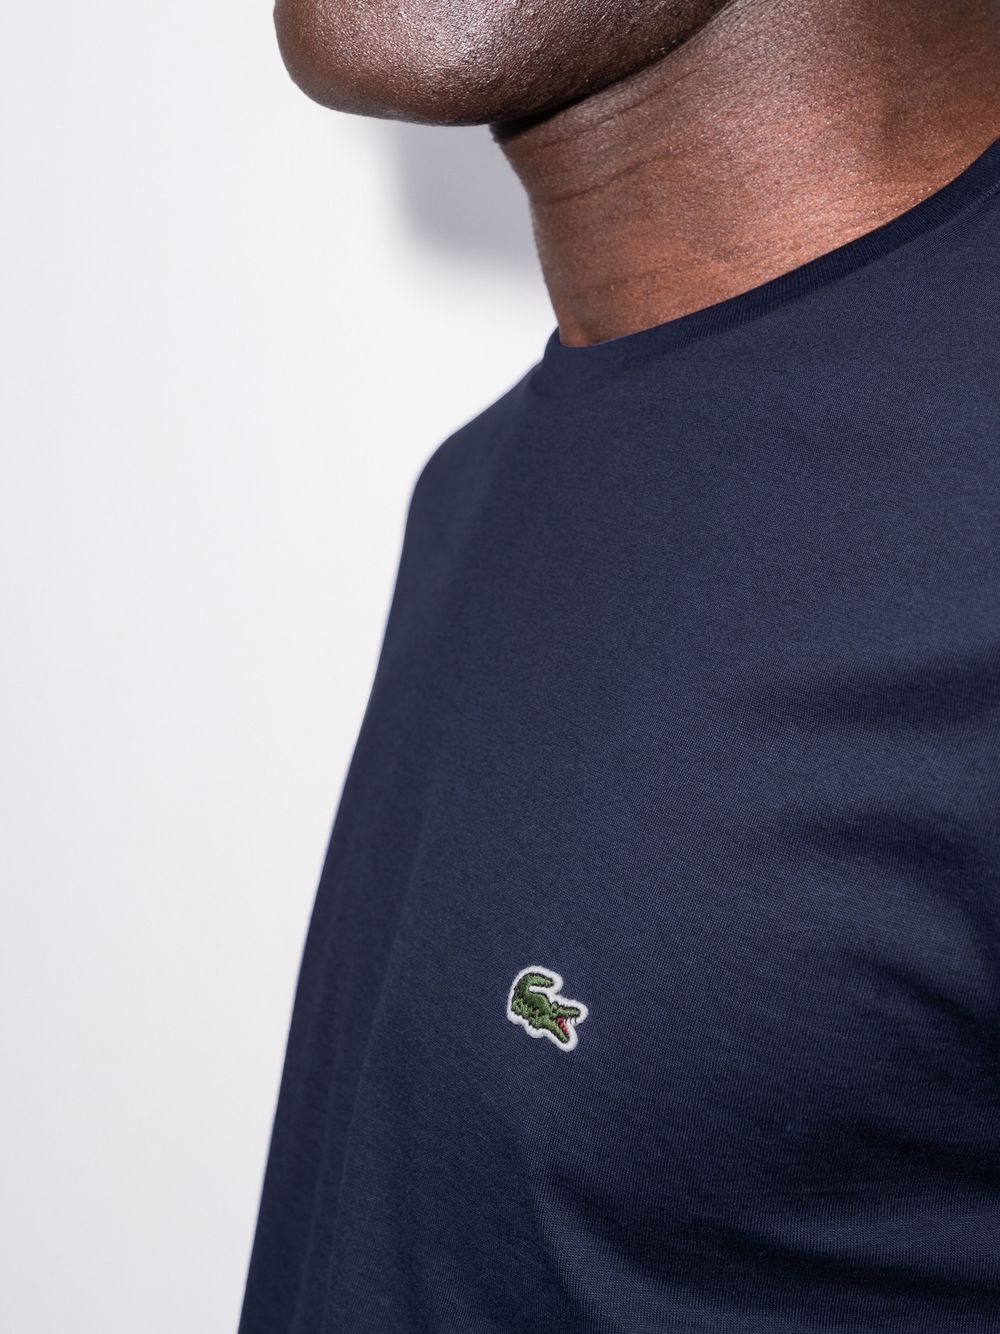 T-shirt in cotone blu navy con patch logo